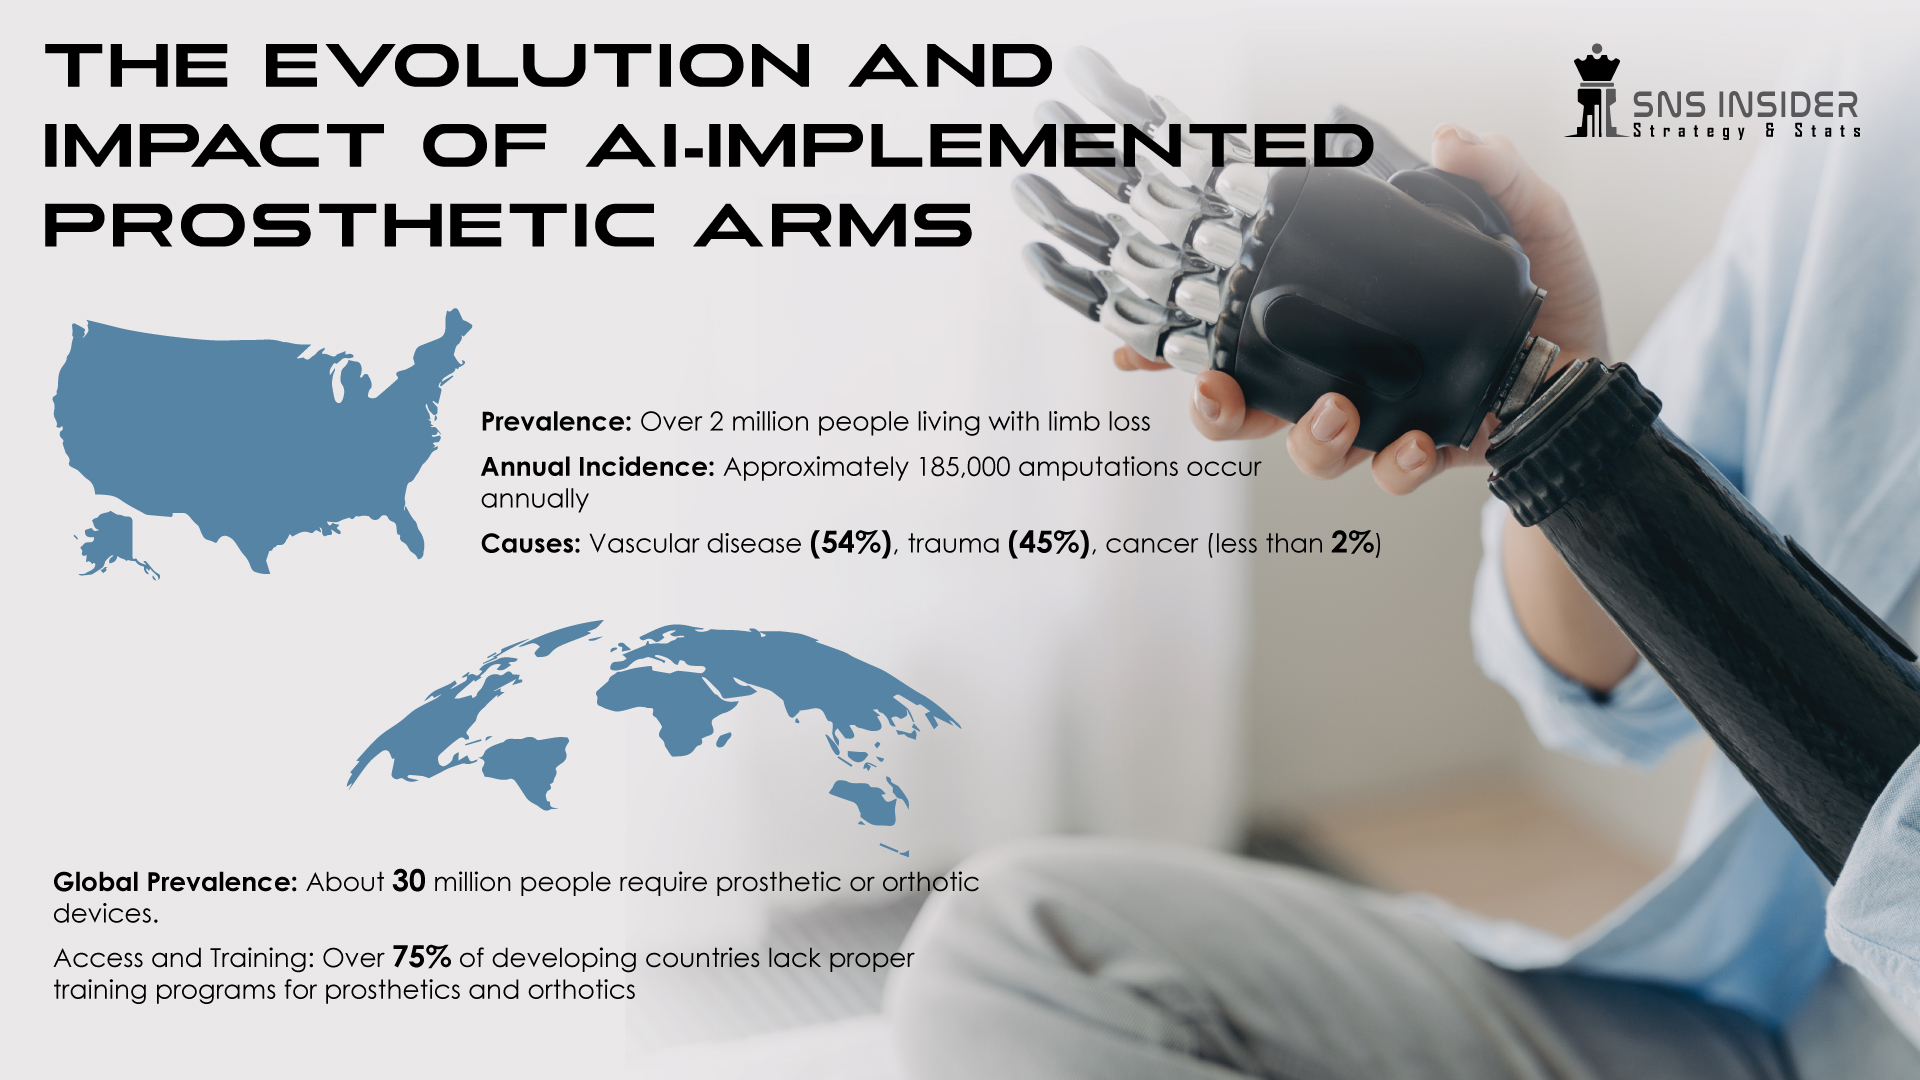 AI-Implemented Prosthetic Arms